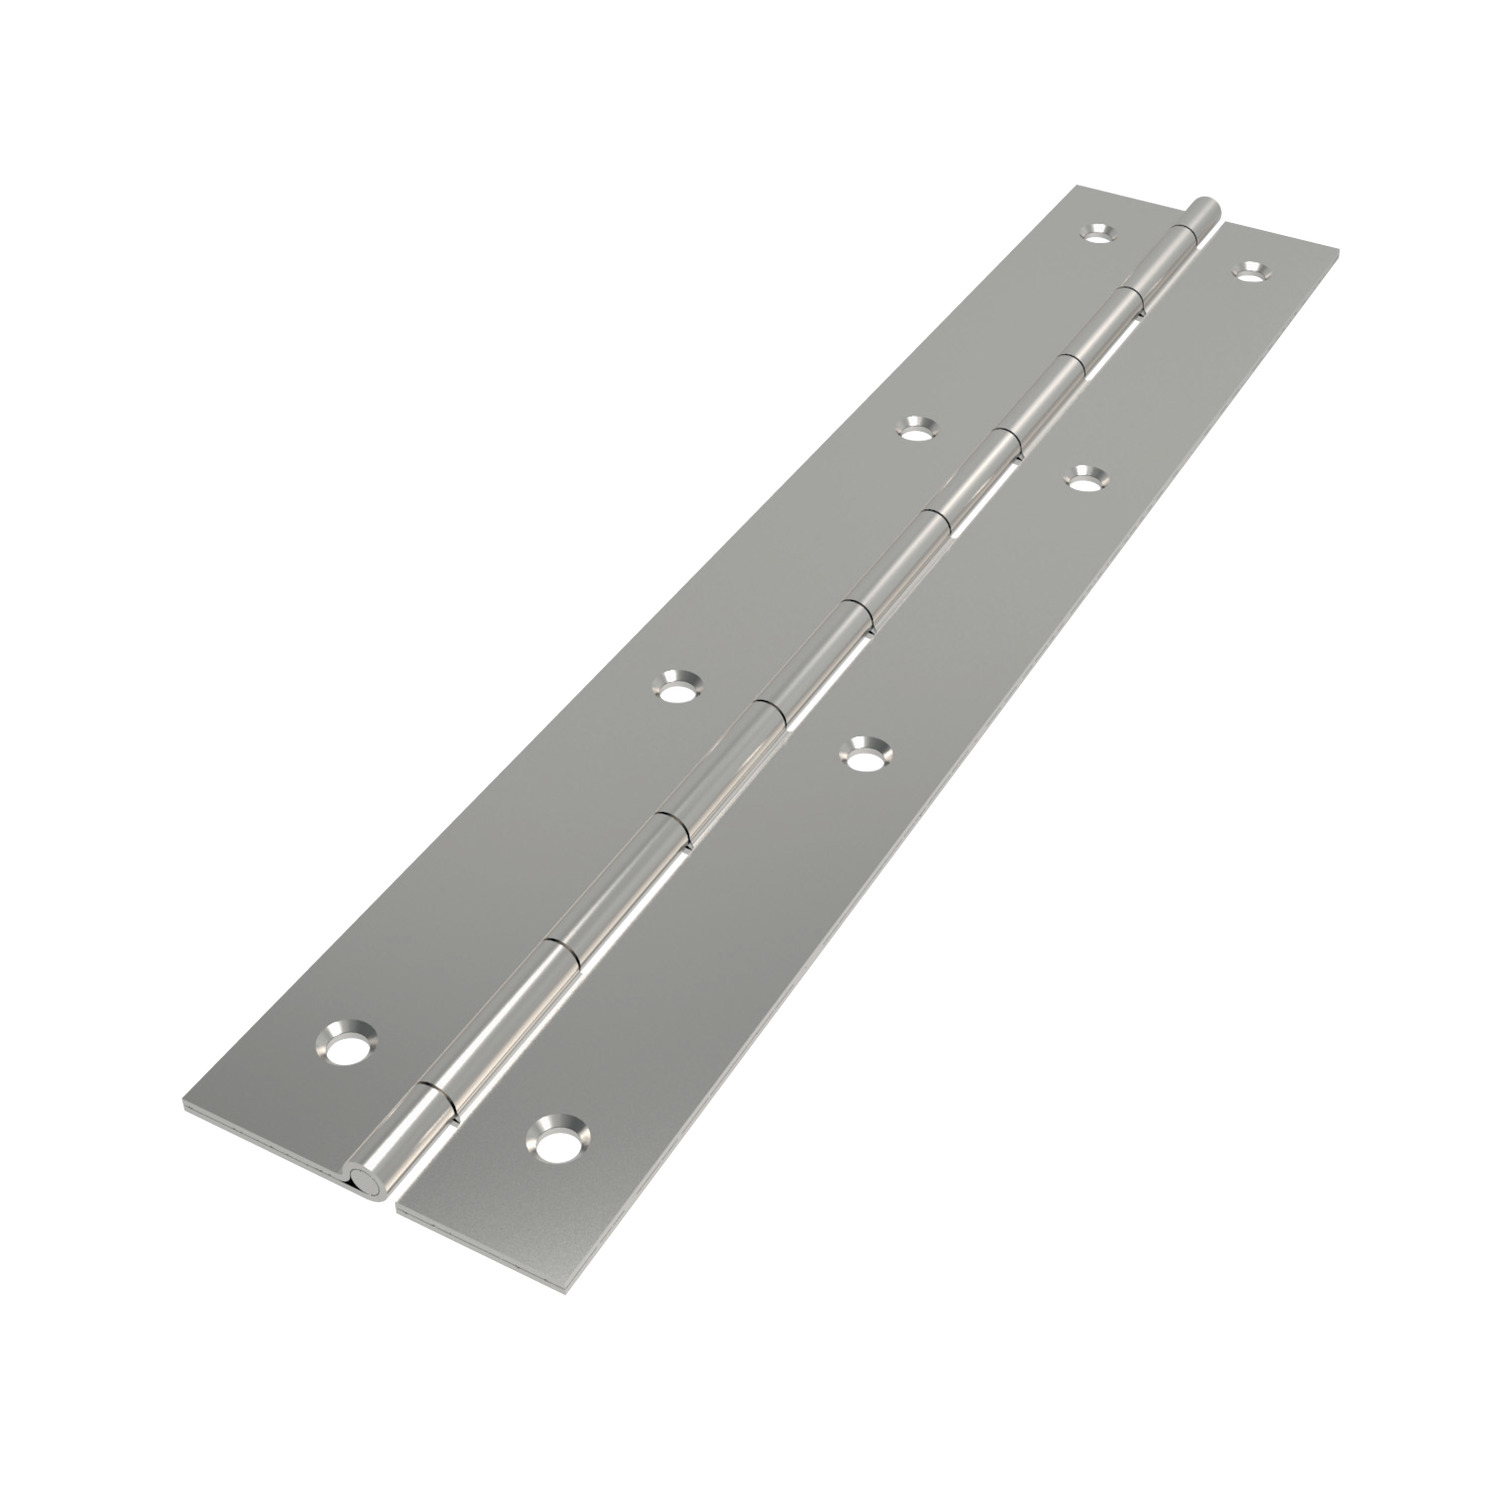 Surface Mount - Piano Hinges Surface screw mount piano hinges, made from stainless steel (AISI 304) with satin finish. For weld on versions see S0050.